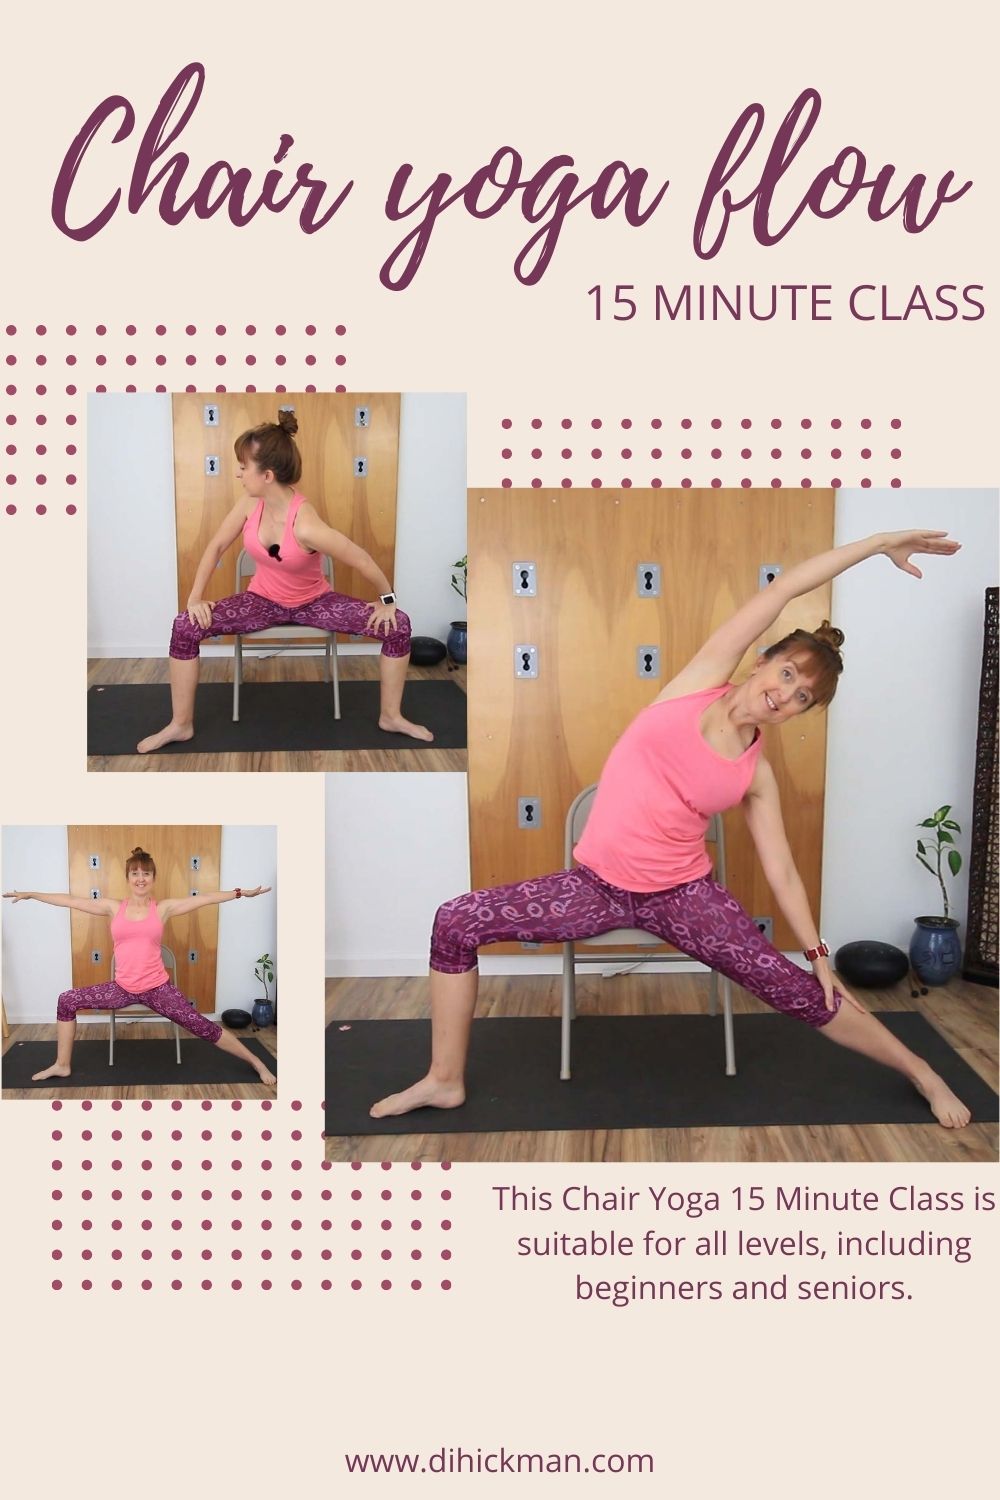 Chair Yoga 15 minutes routine for all levels - great for beginners & seniors